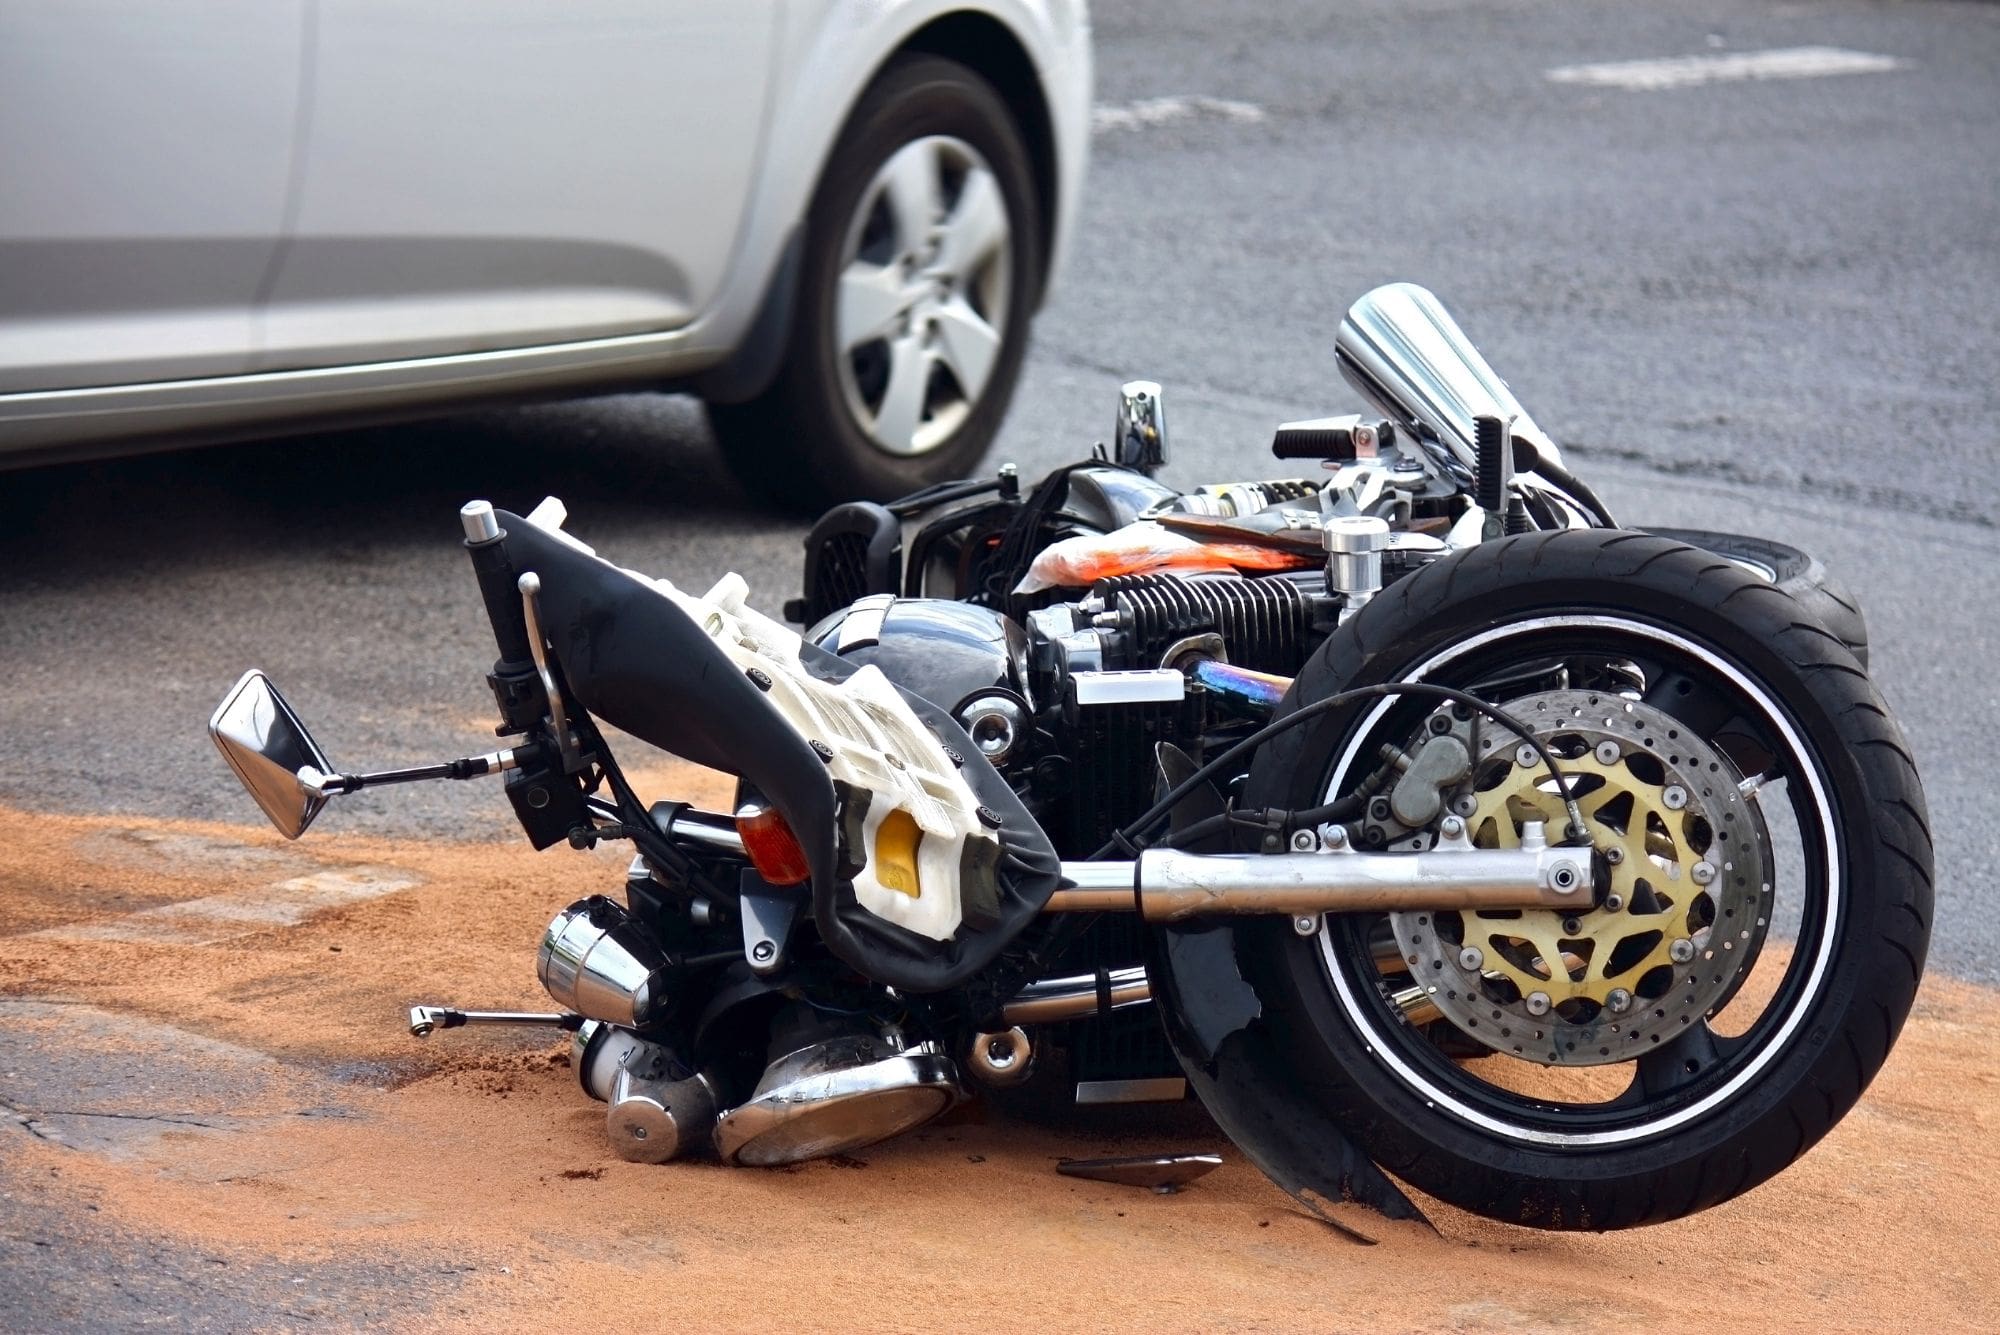 image of a motorcycle on the ground